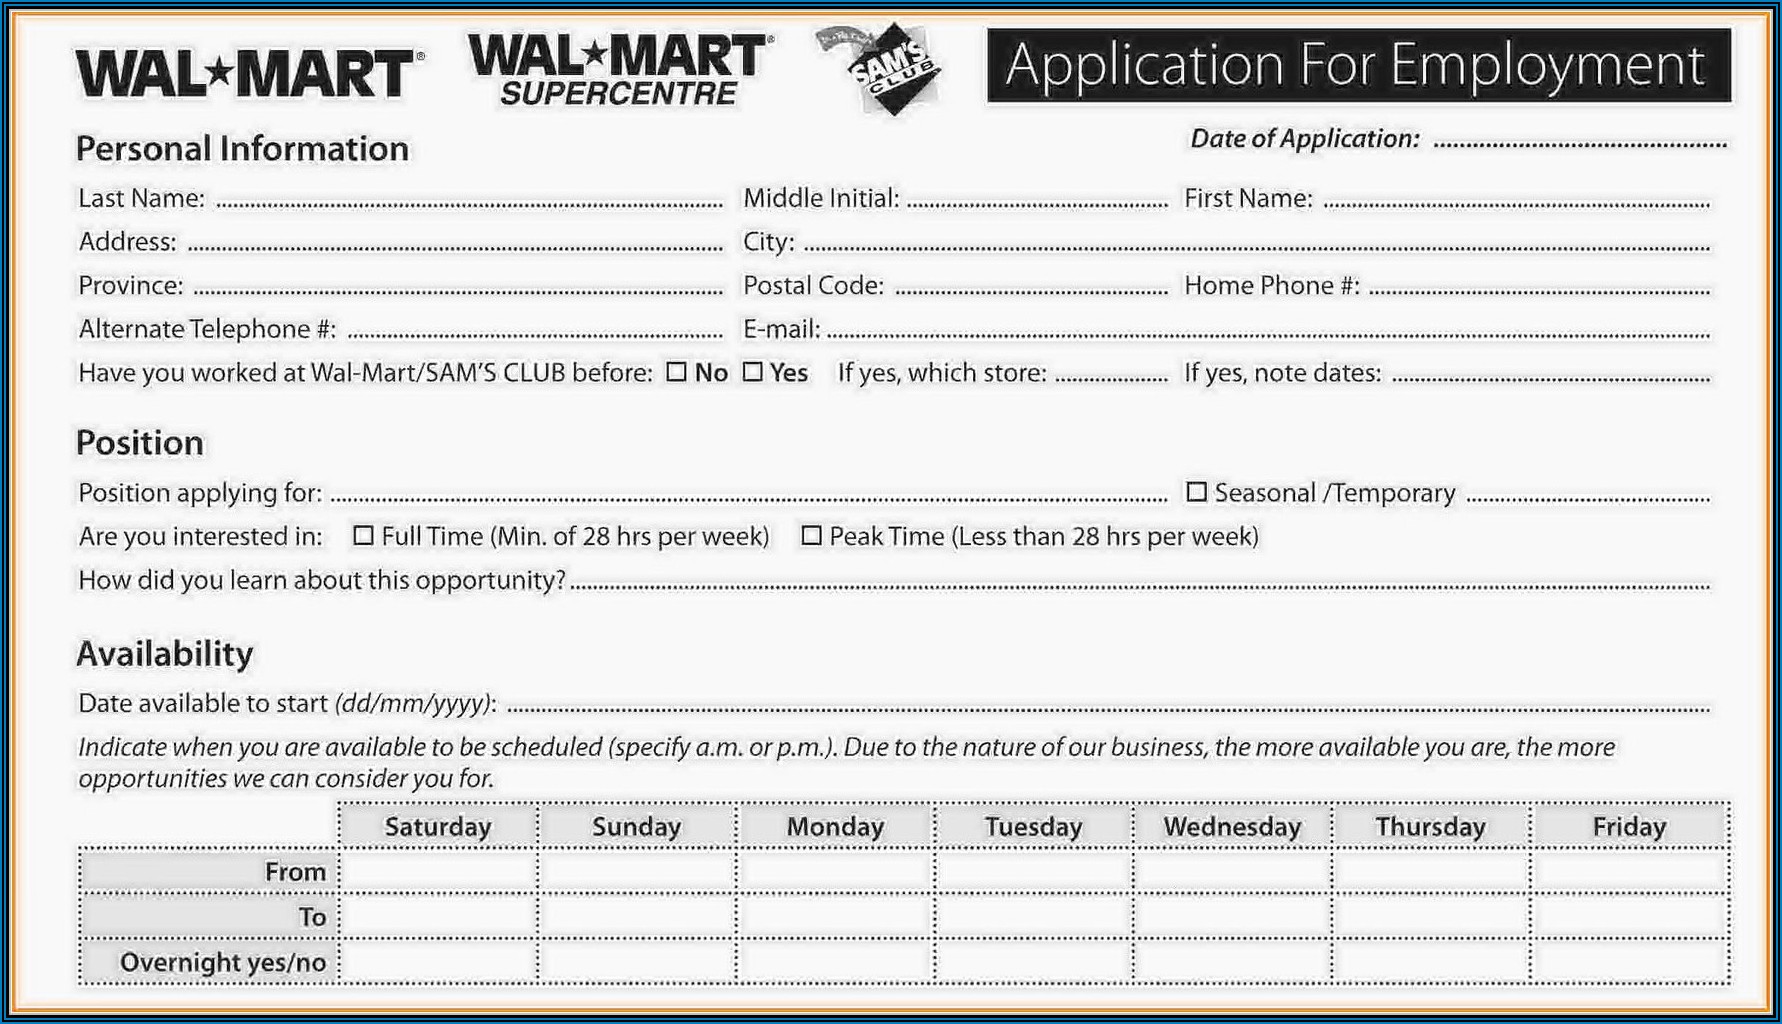 How To Get My W2 Form Online From Walmart